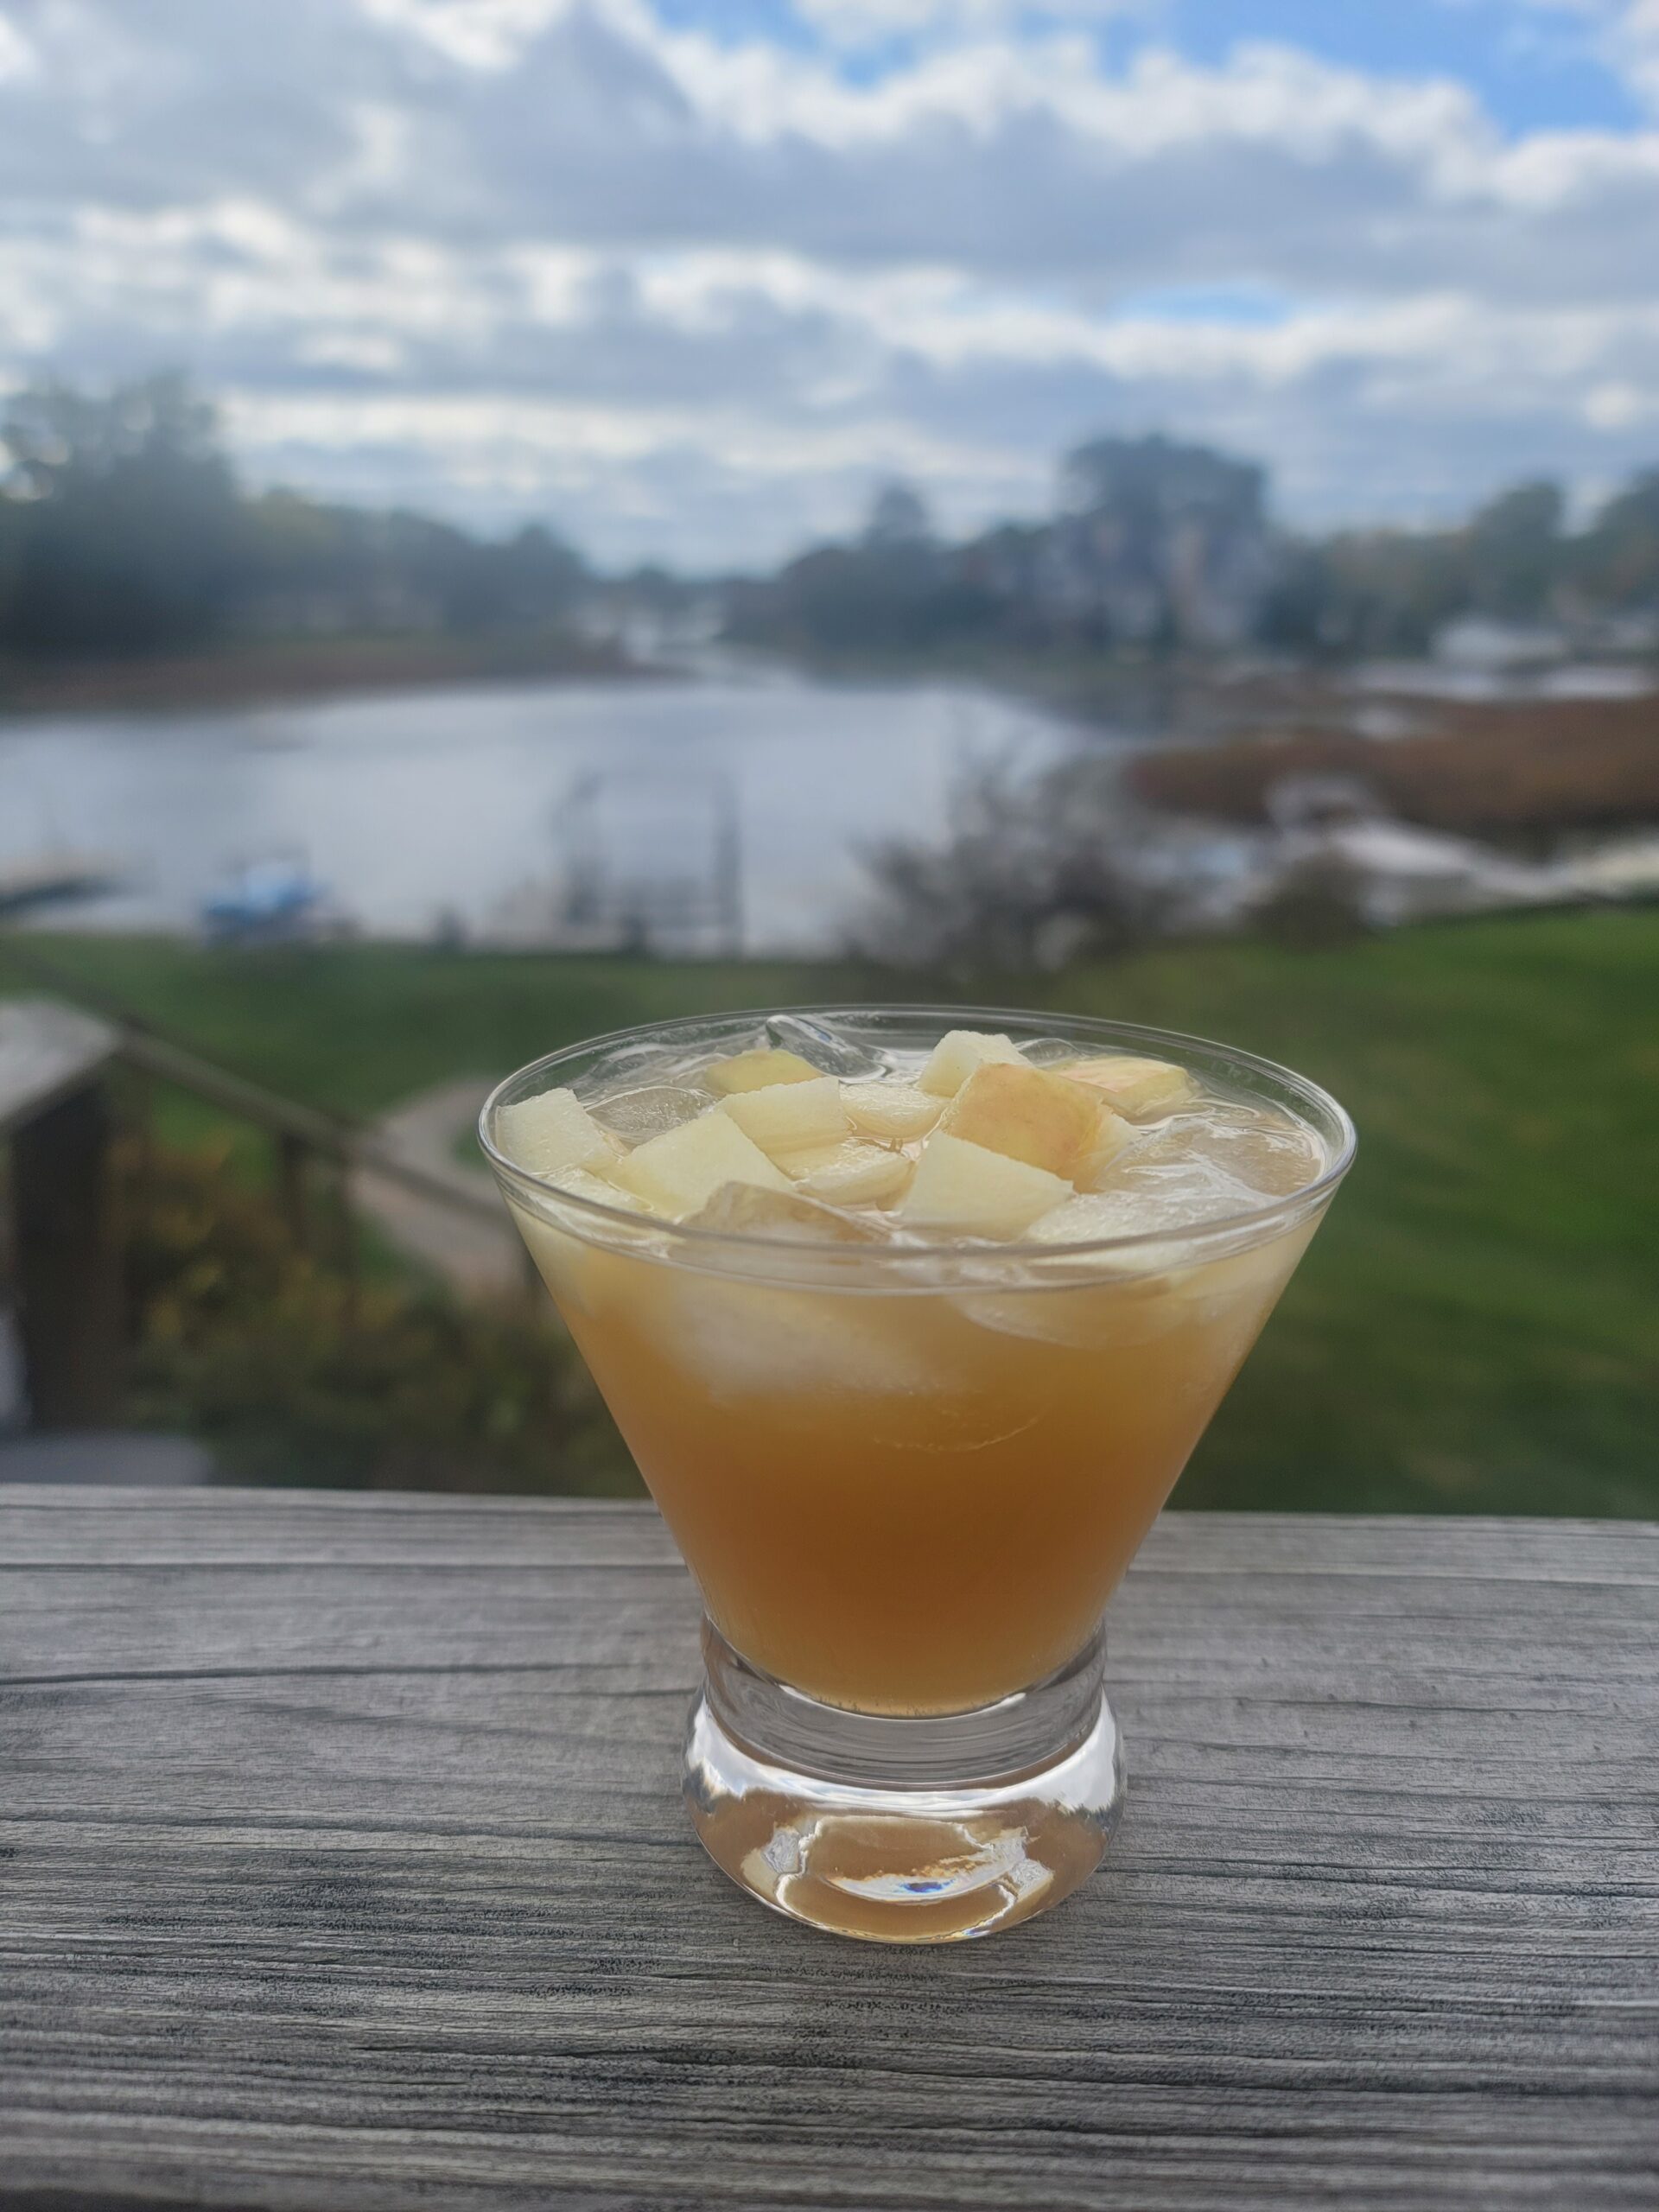 How to Make Apple Cider Cocktails For the Fall